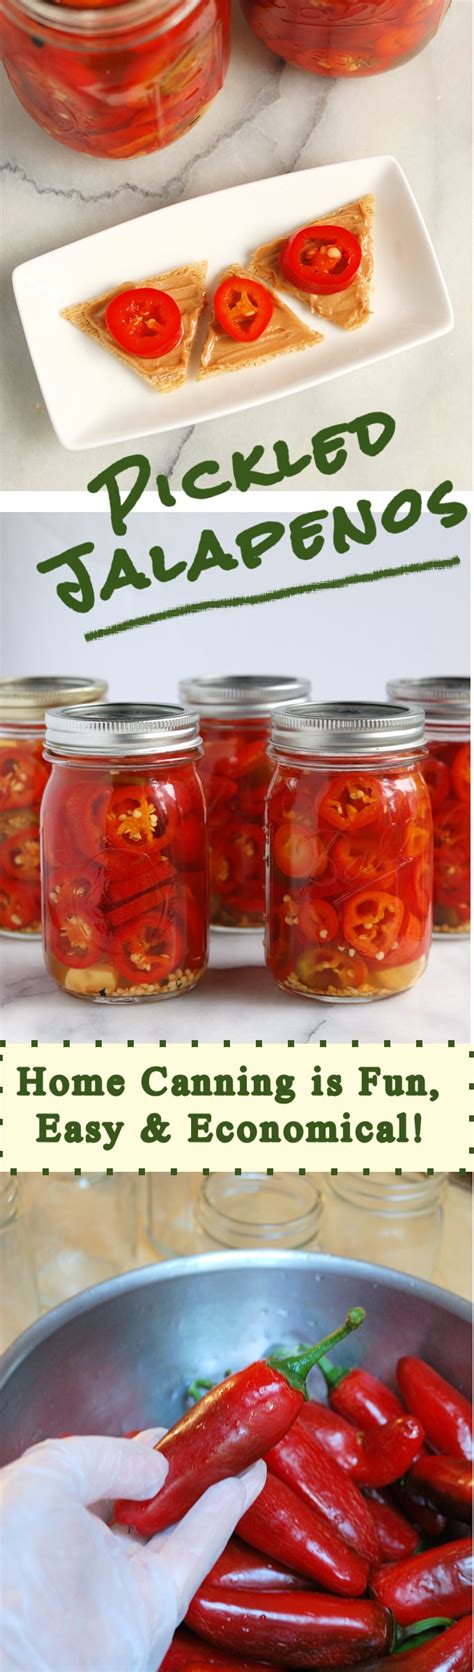 Pickled Jalapeno Peppers Home Canning Baking Sense